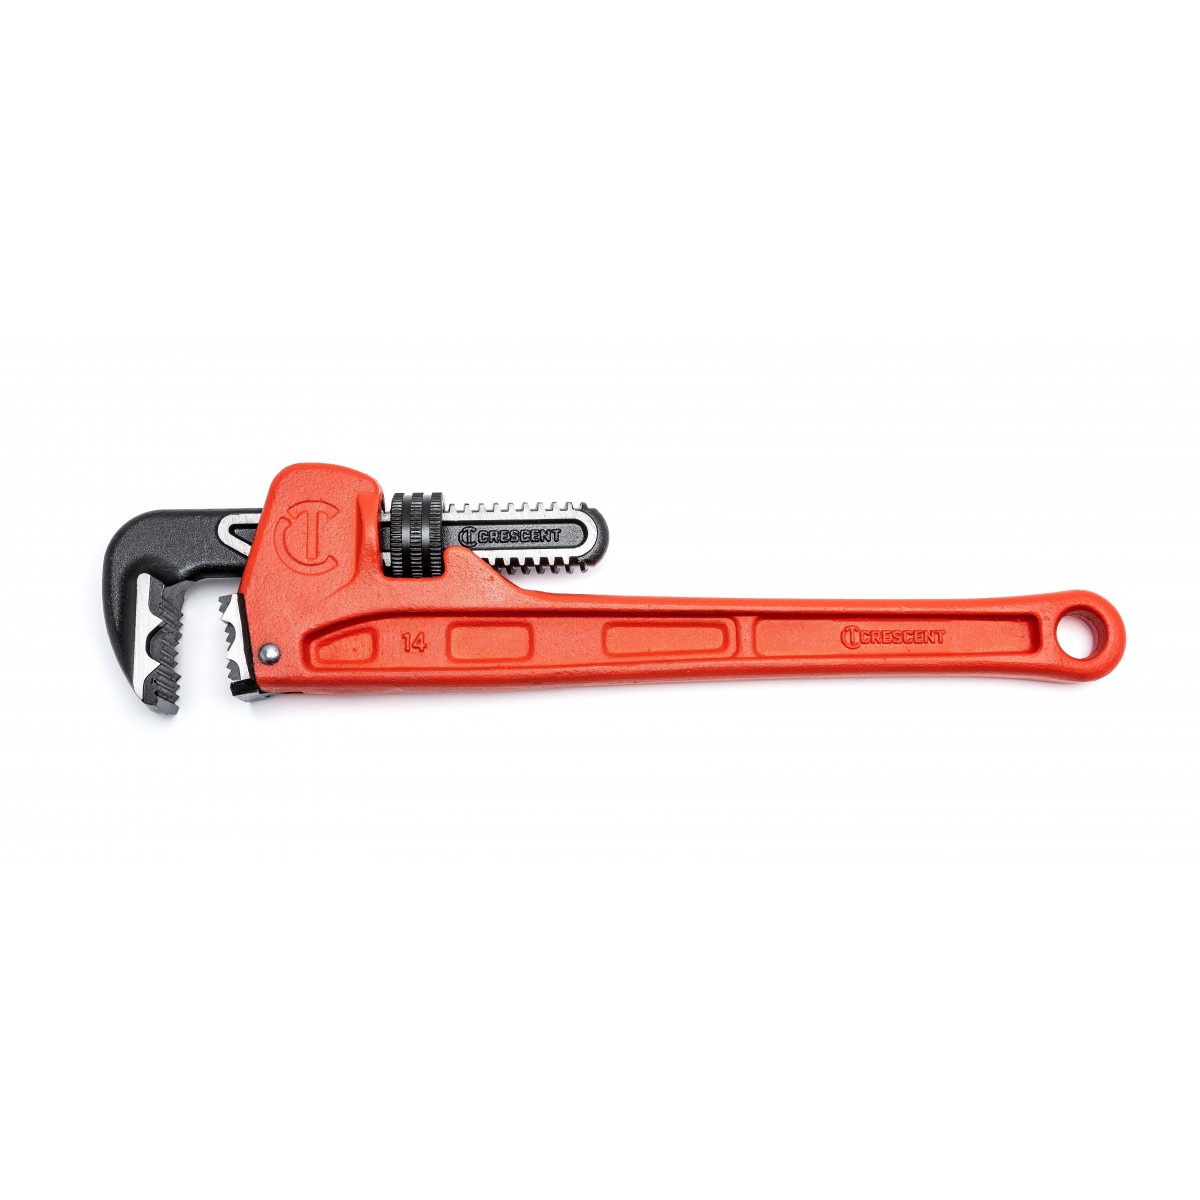 Crescent CIPW14 Pipe Wrench, 0 to 2-3/8 in Jaw, 14 in L, Cast Iron/Steel, Powder-Coated